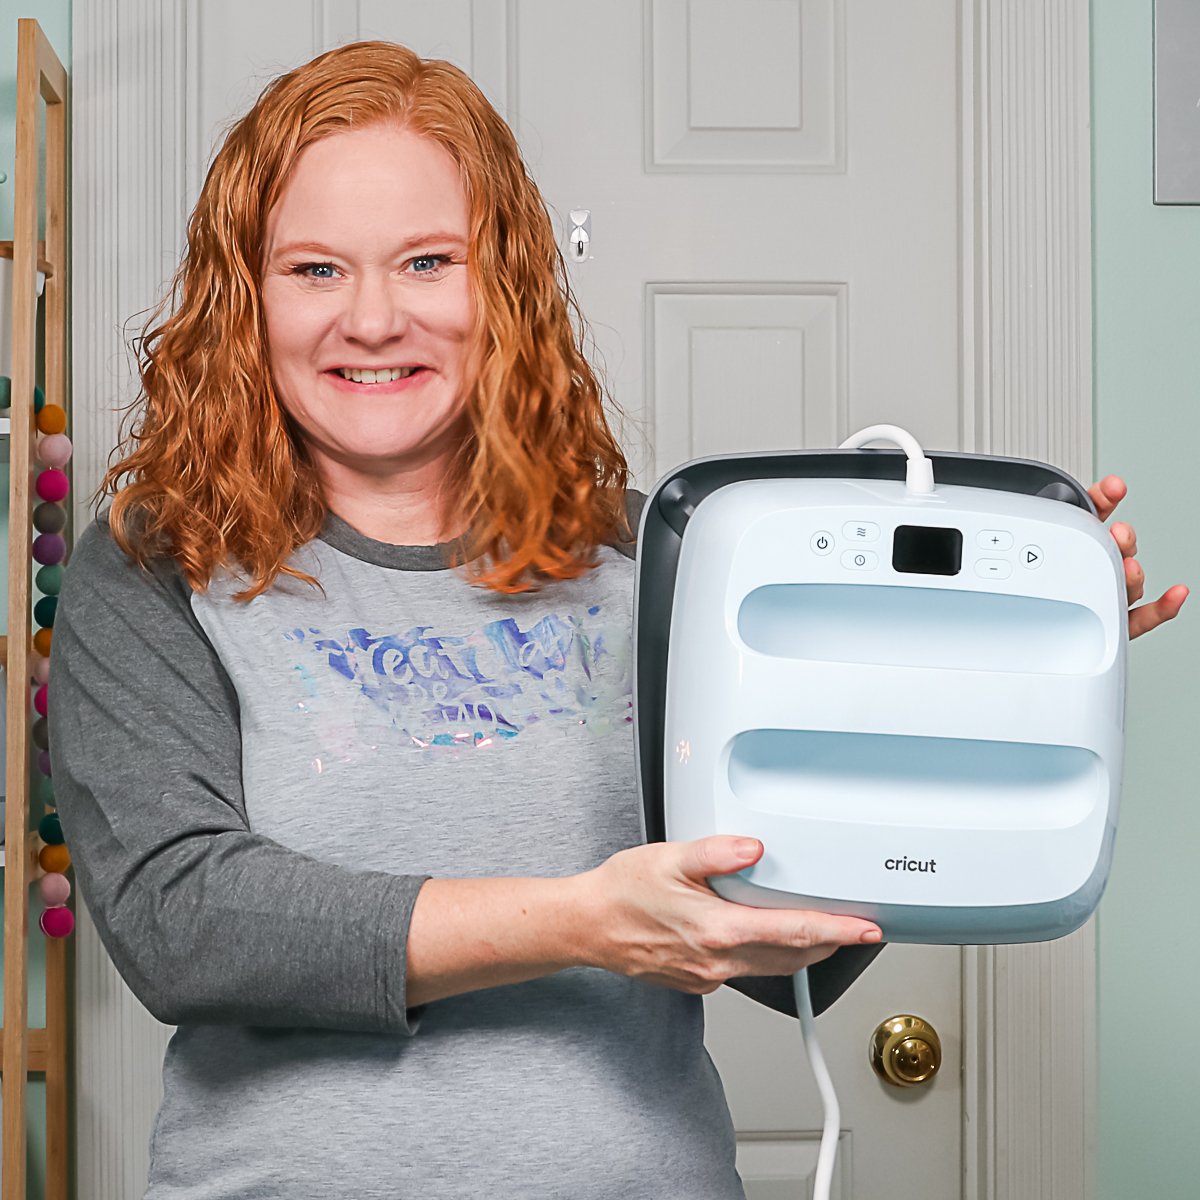 angie holden with cricut easypress 3